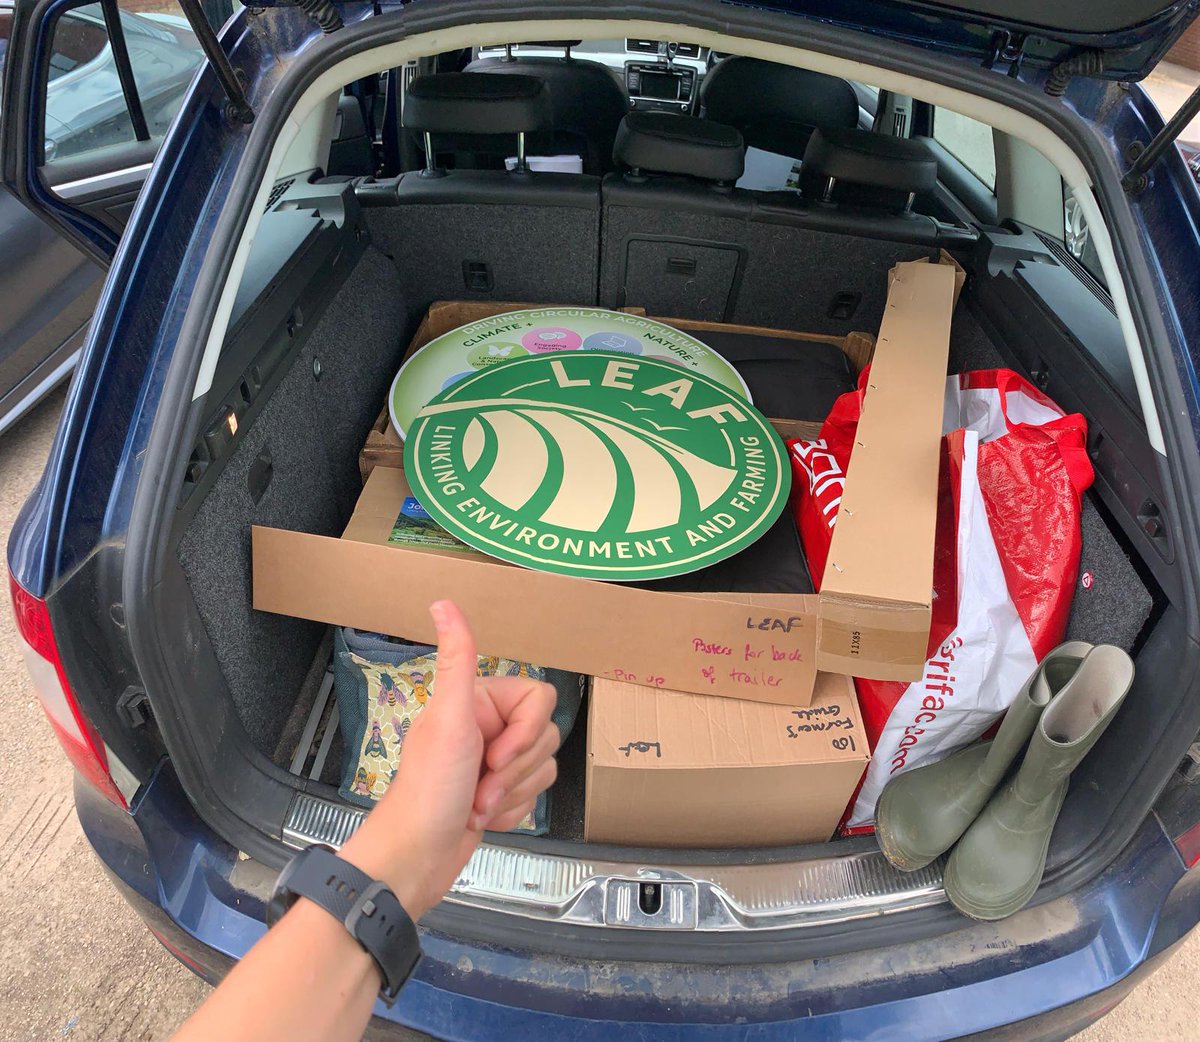 We're all packed and ready for @Groundswellaguk tomorrow! 👍

Come and say hello at our stand (A0) and hear more about our amazing project work around regen & #netzero, #IntegratedFarmManagement, #LEAFMarque certification, @LEAF_Education & @OpenFarmSunday!